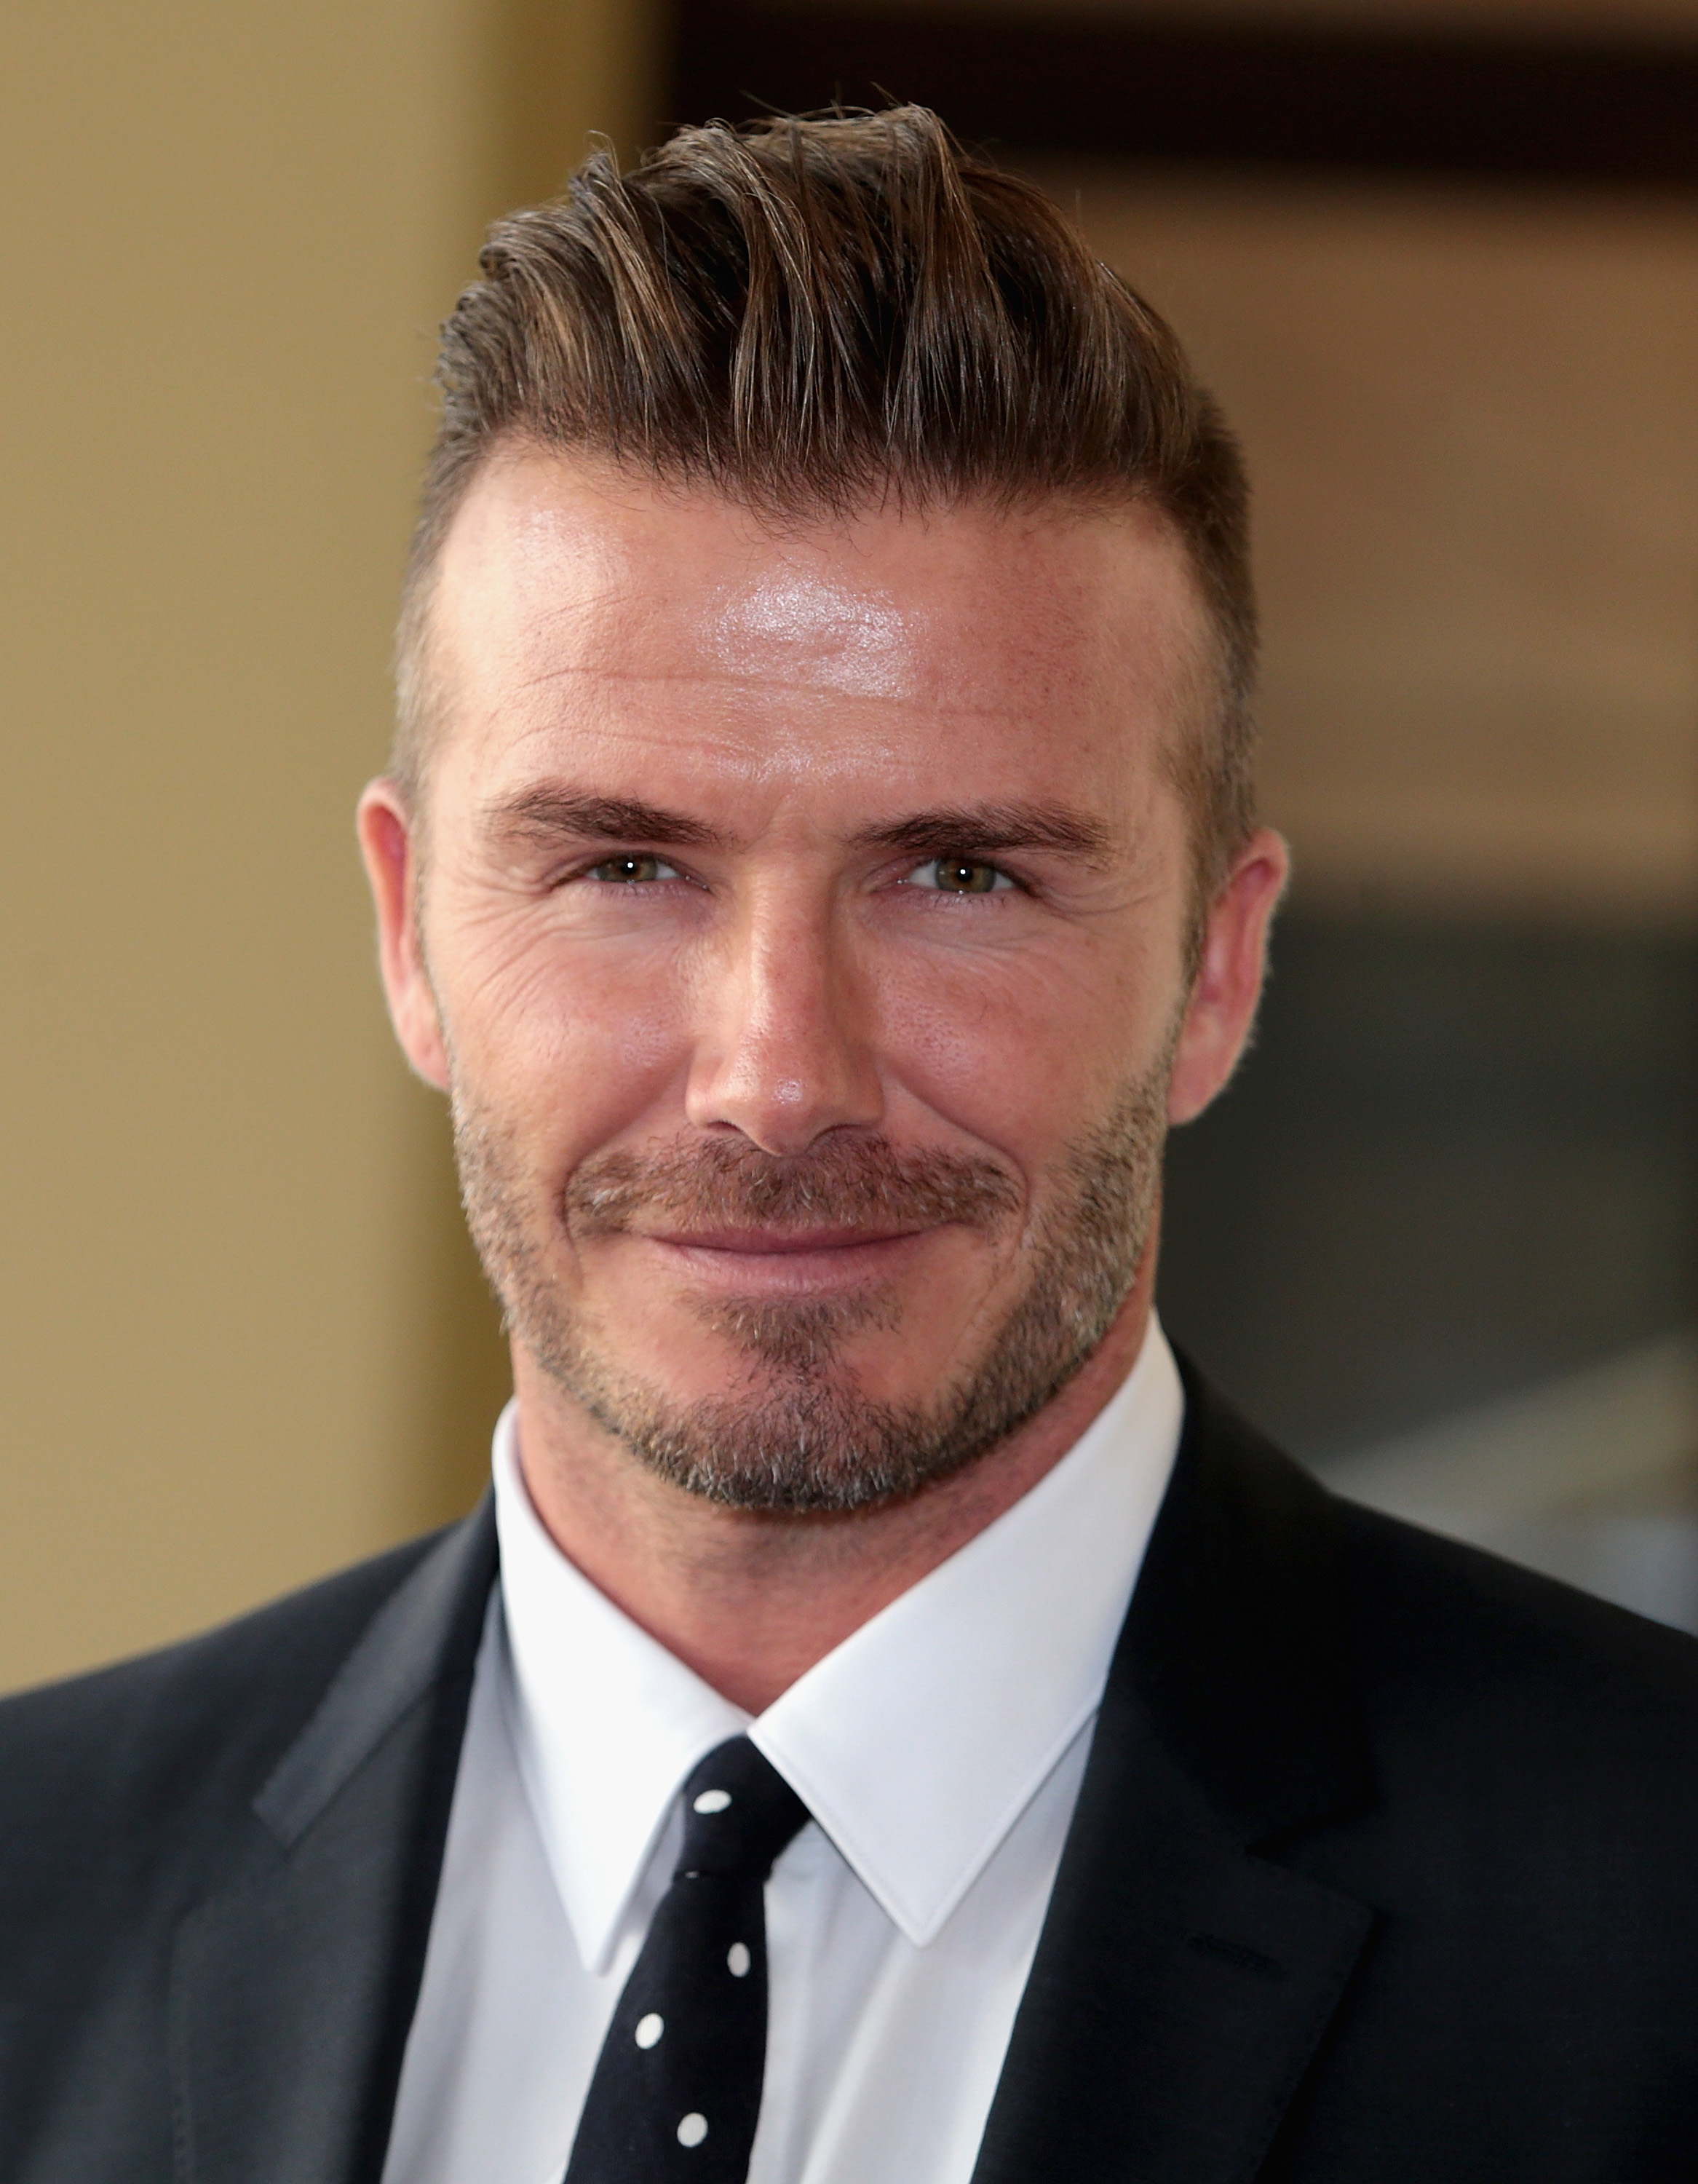 David Beckham at Buckingham Palace for the Queen's Young Leaders Event on June 22, 2015 in London, England. | Source: Getty Images